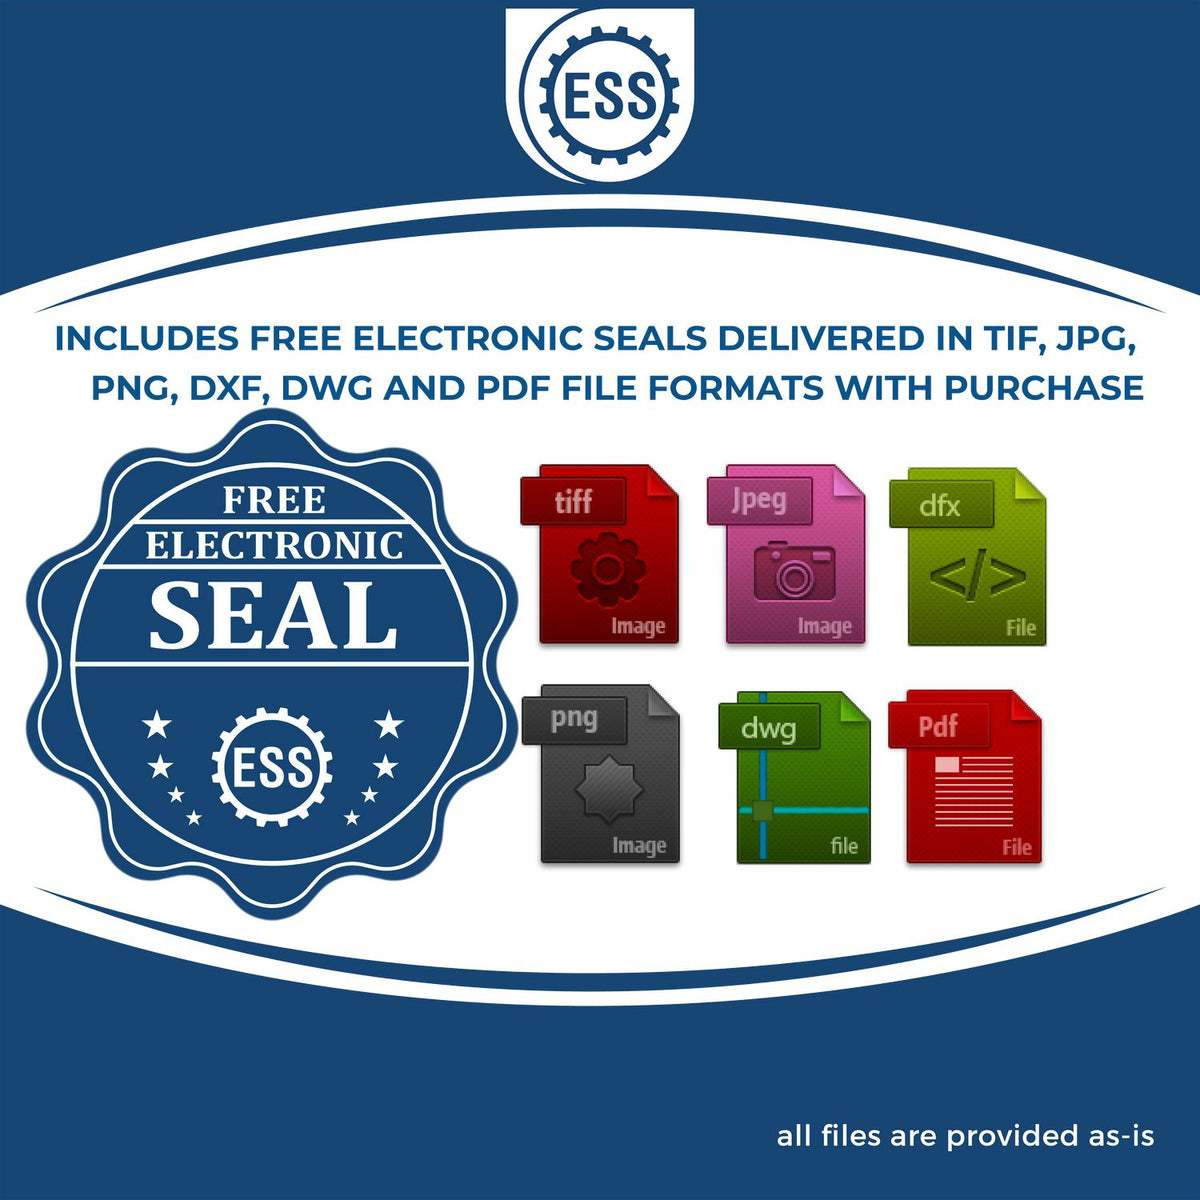 An infographic for the free electronic seal for the Handheld Texas Professional Engineer Embosser illustrating the different file type icons such as DXF, DWG, TIF, JPG and PNG.